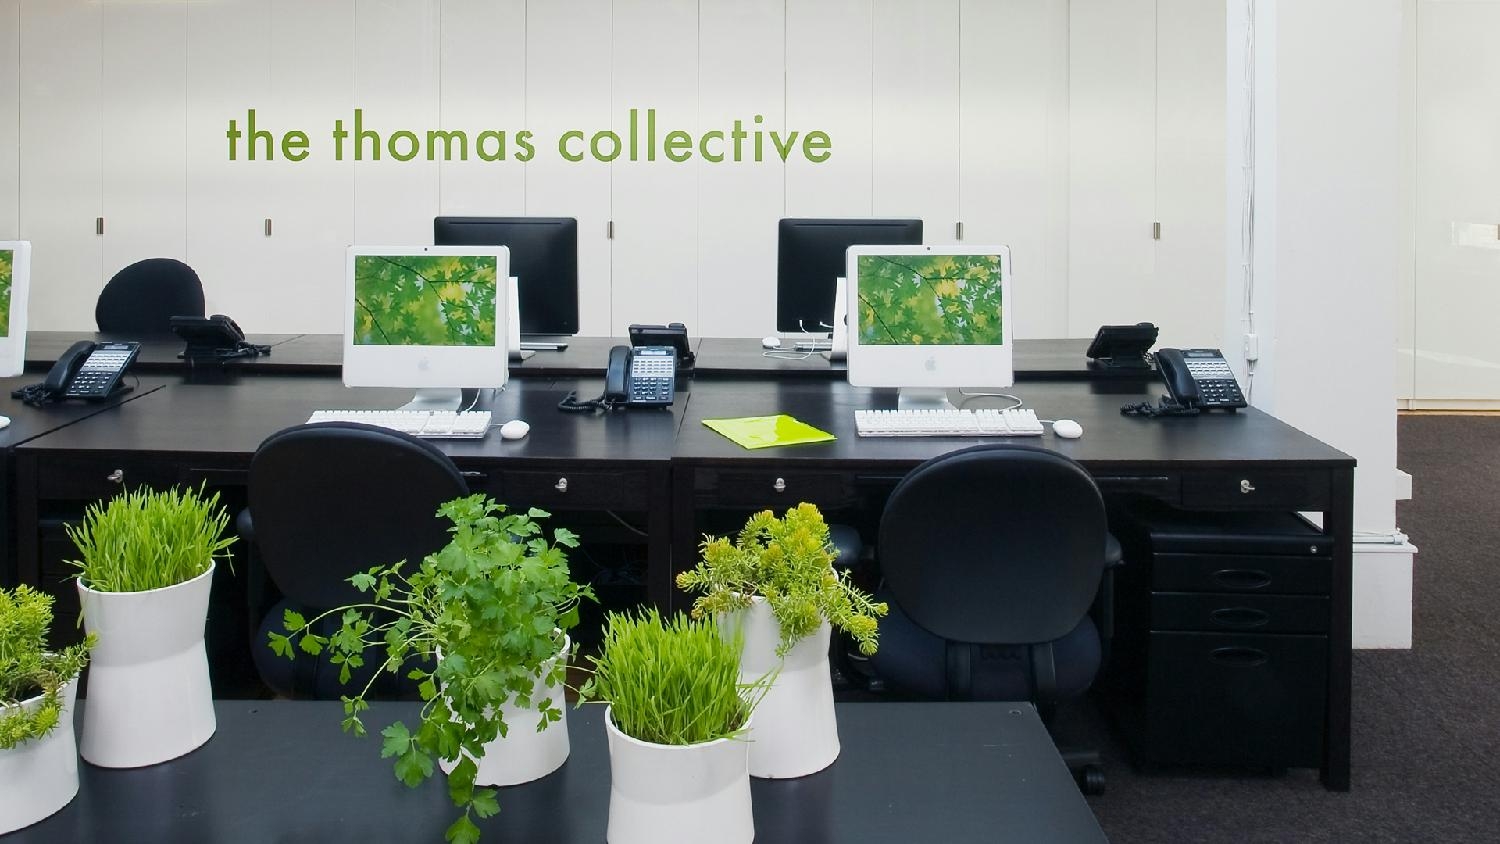 The Thomas Collective is headquartered in New York City.